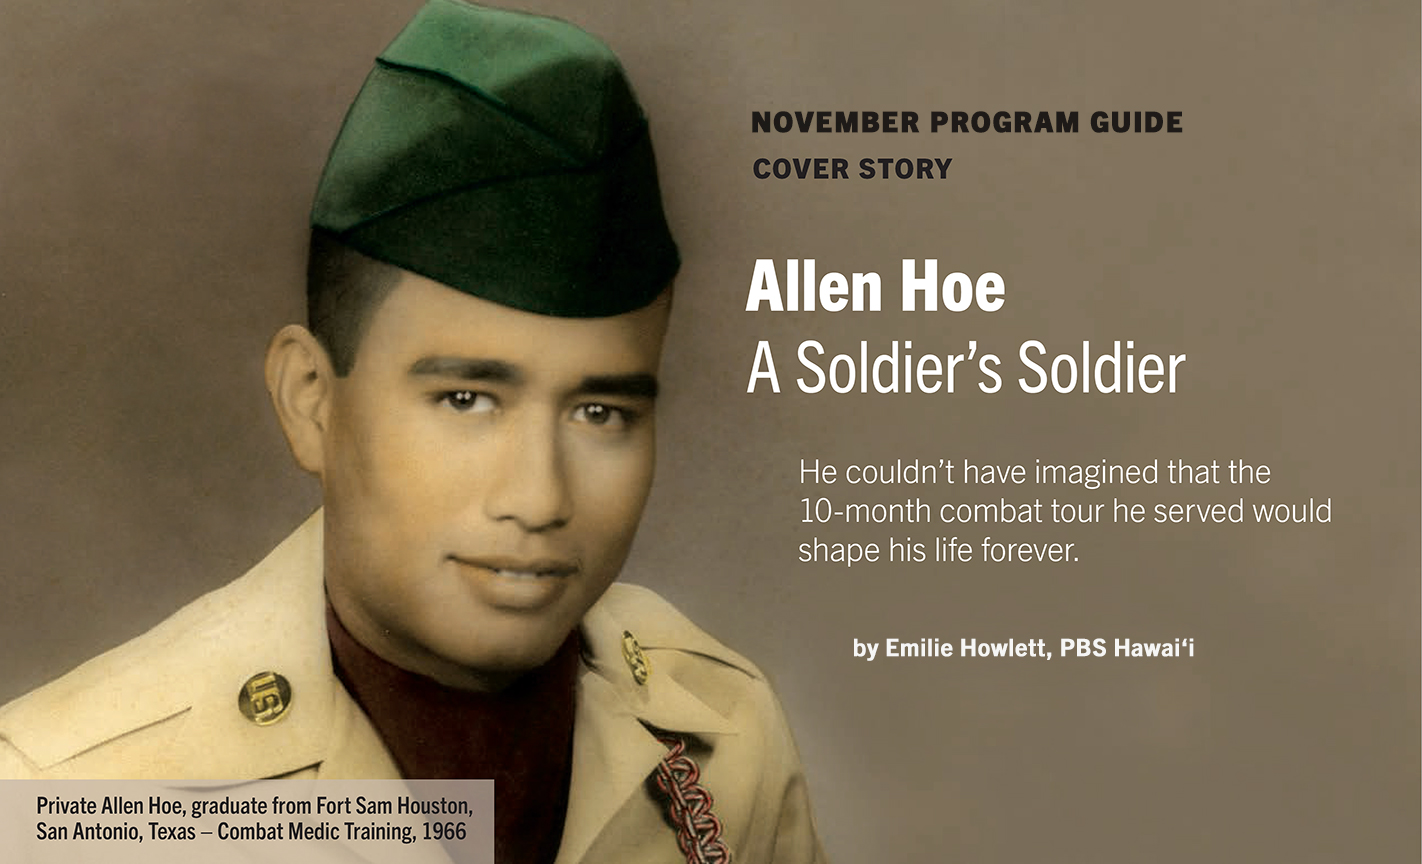 ALLEN HOE: A Soldier's Story by Emilie Howlett